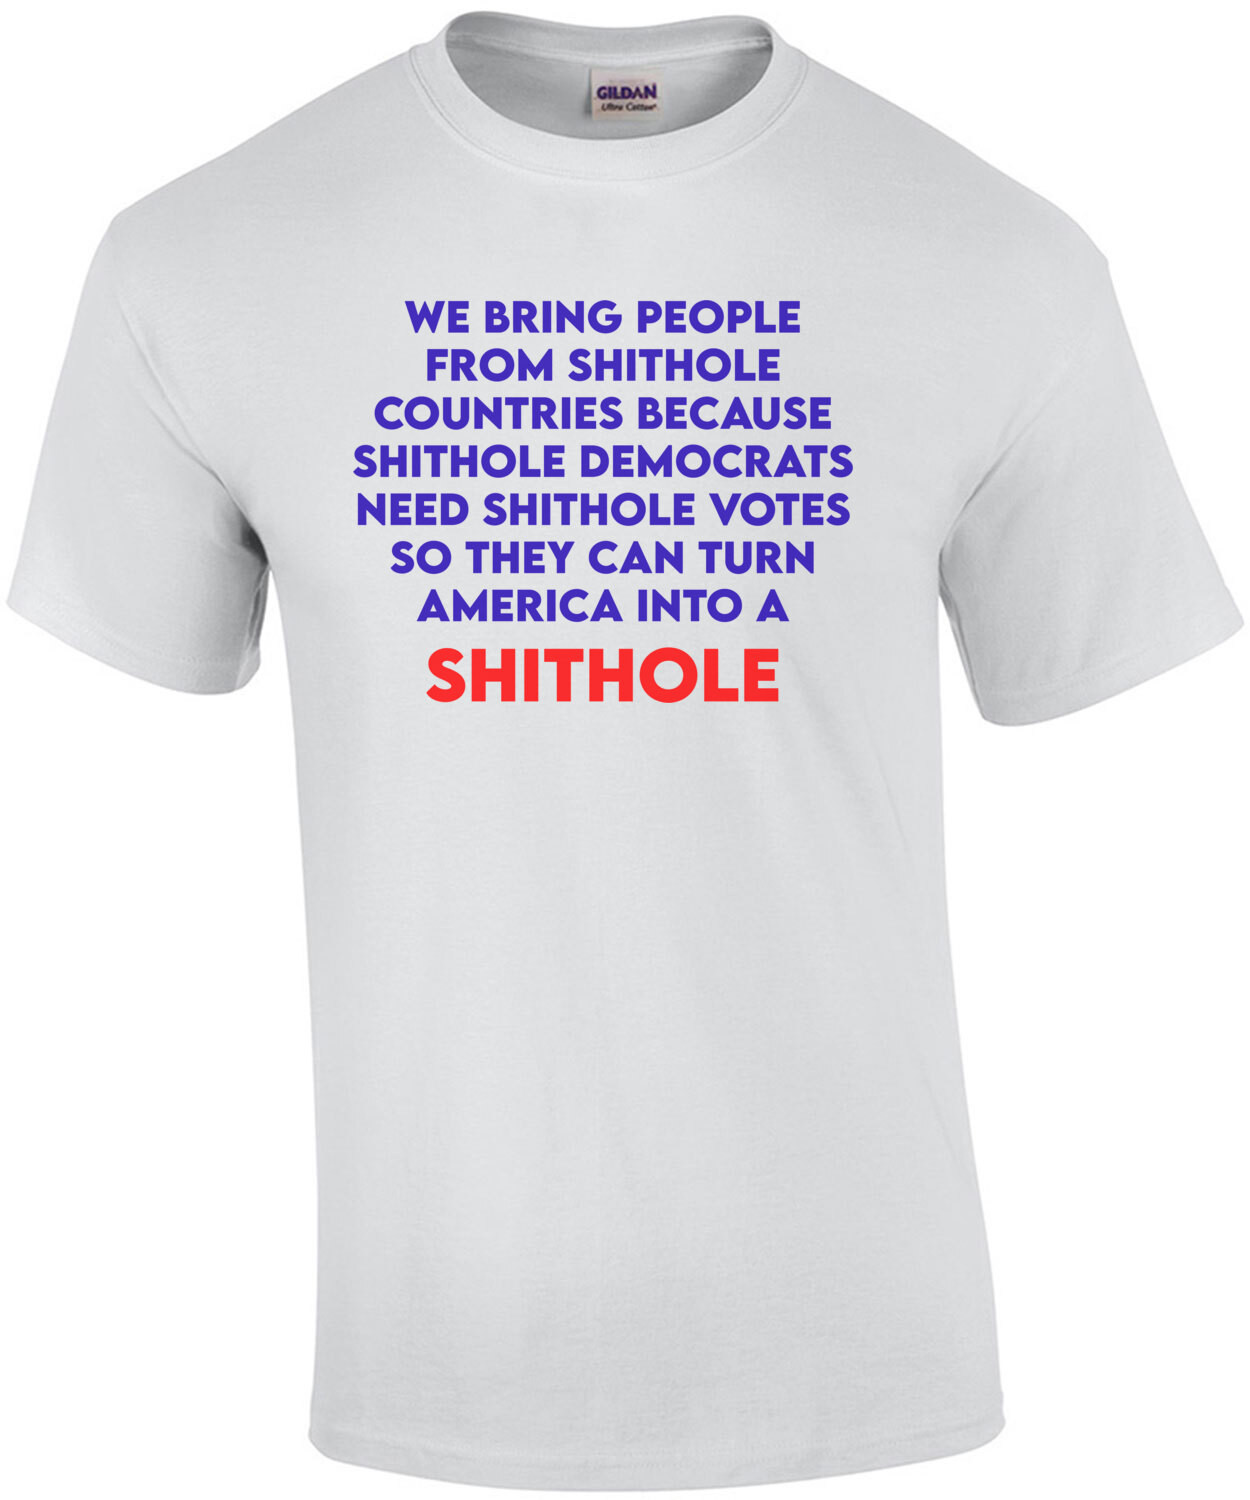 We bring people from shithole countries... Funny Republican shirt